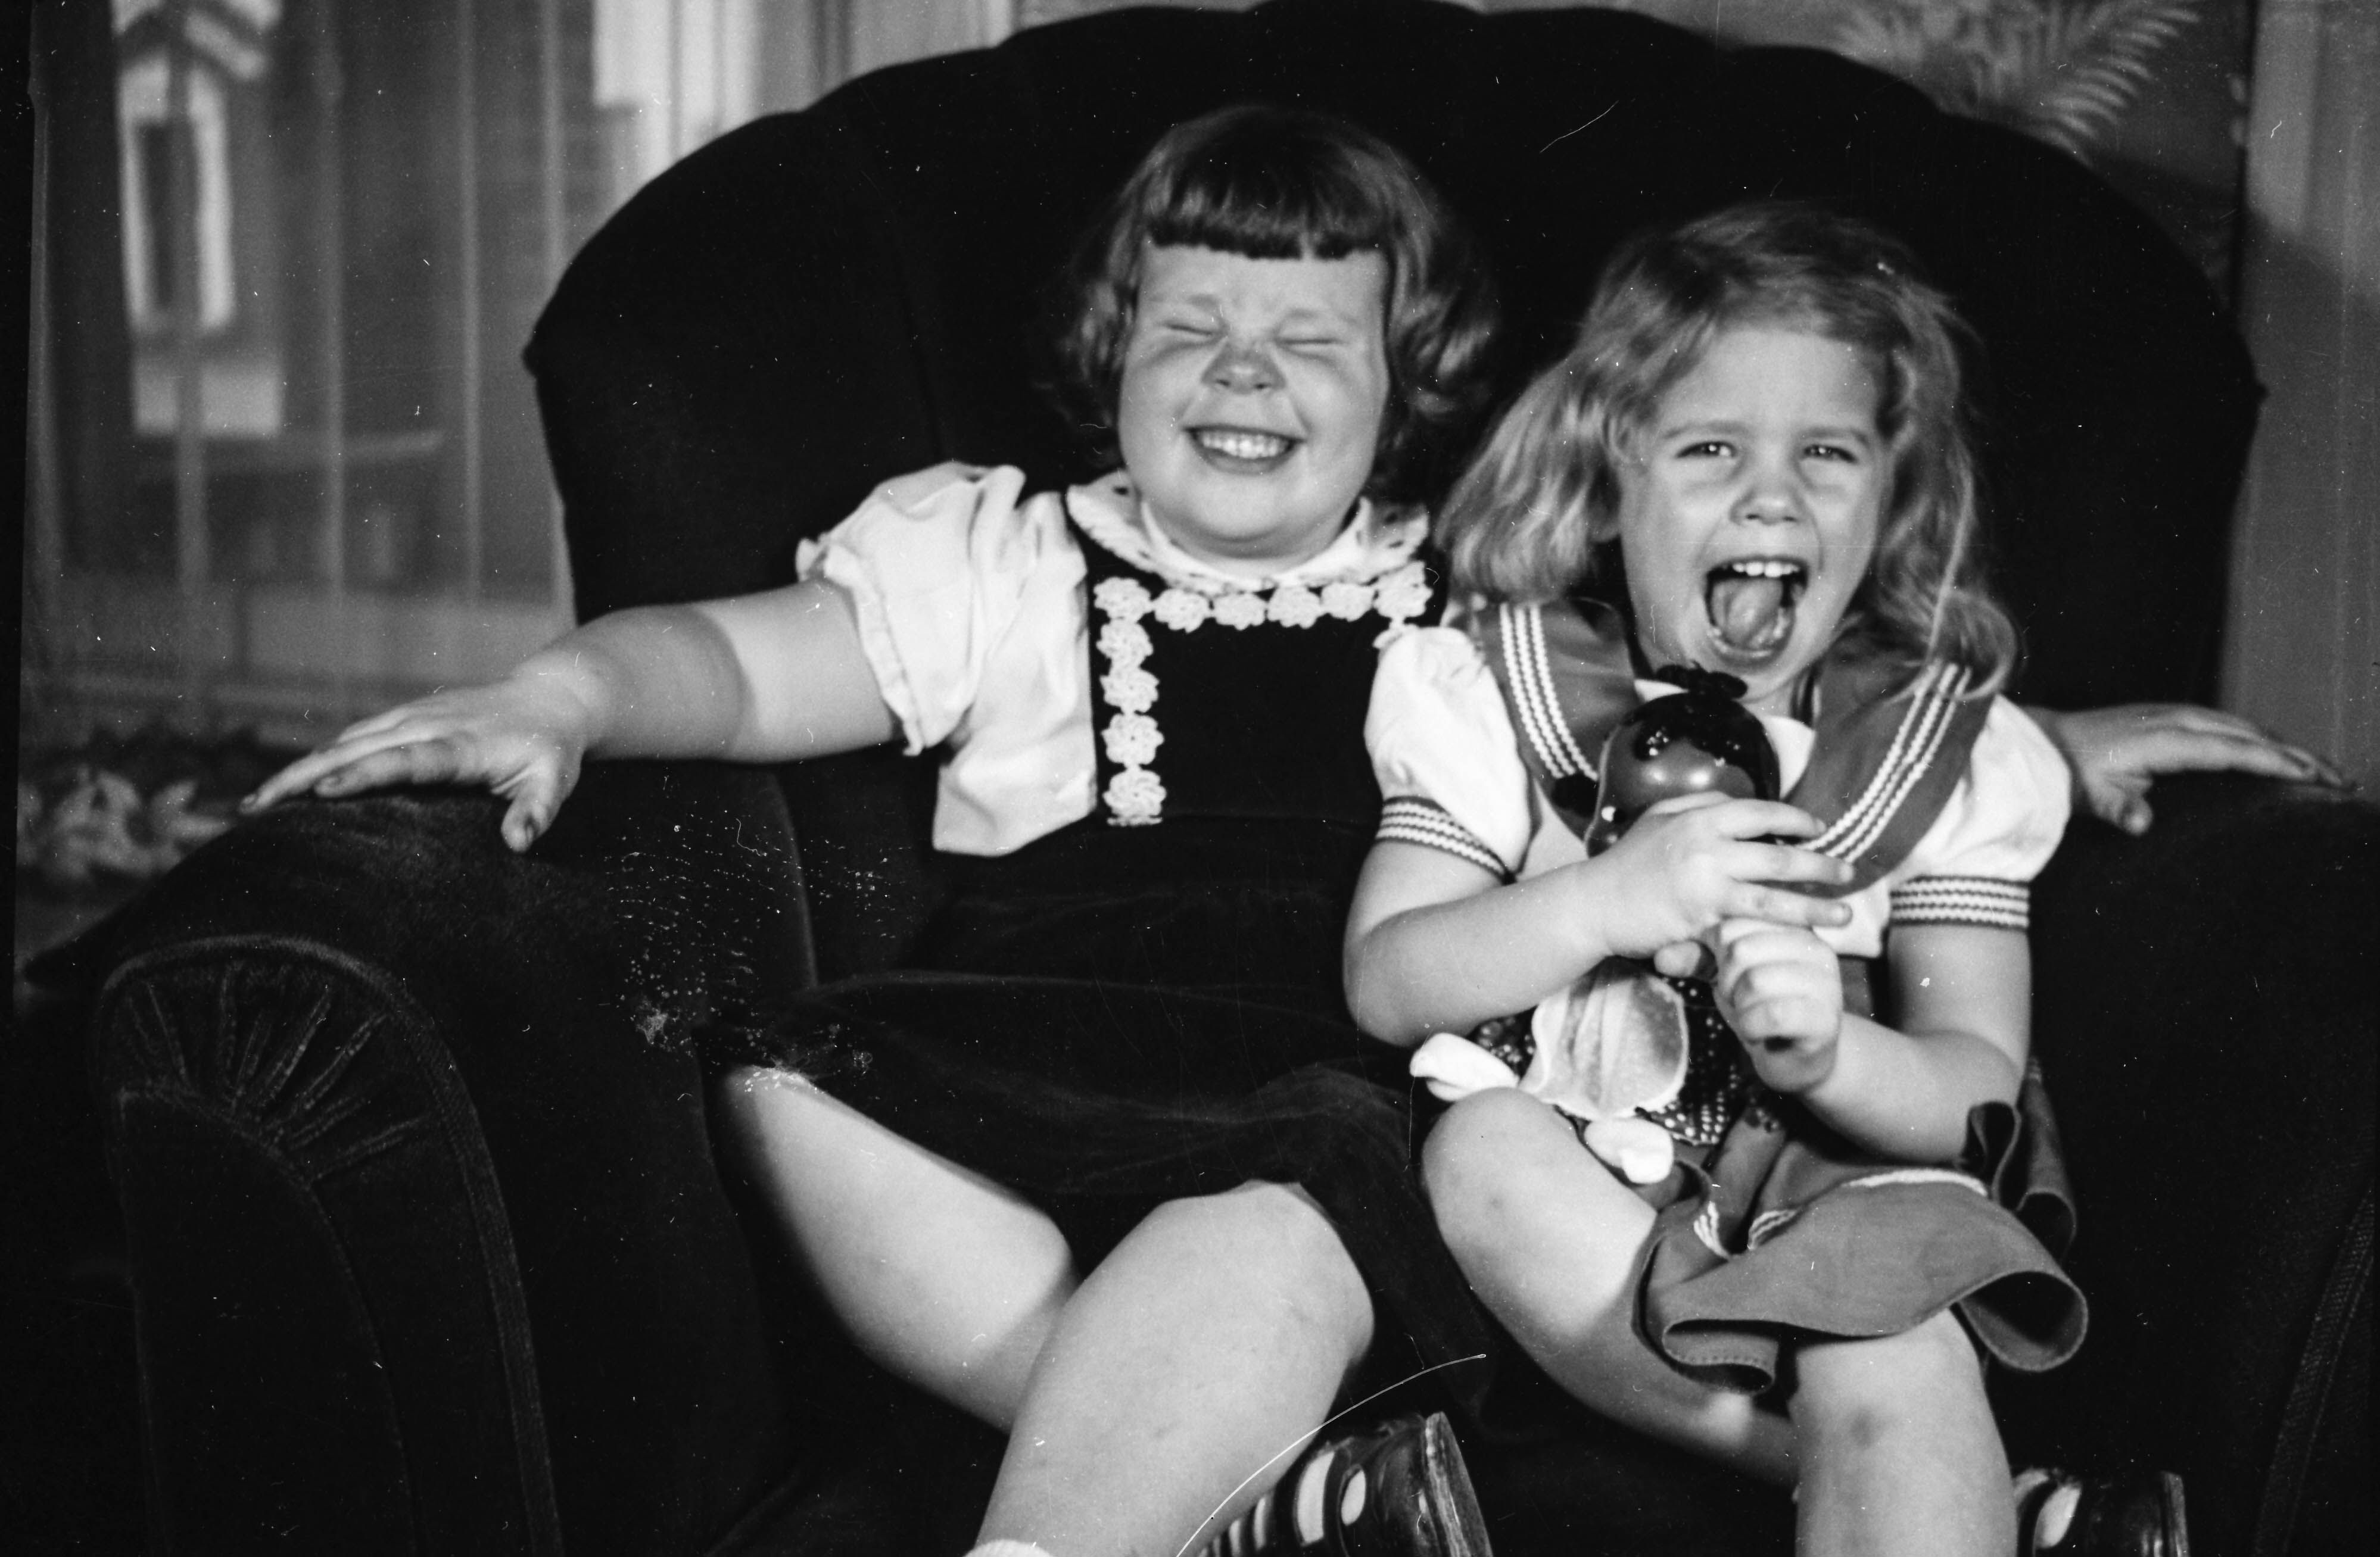 Wallpaper, old, girls, white, black, monochrome, kids, laughing, vintage, children, found, toys, blackwhite, eyes, chair, closed, antique, snapshot, sofa, photograph, dresses, grinning, vernacular, chubby, eyesclosed, foundphotograph, giggling, vision